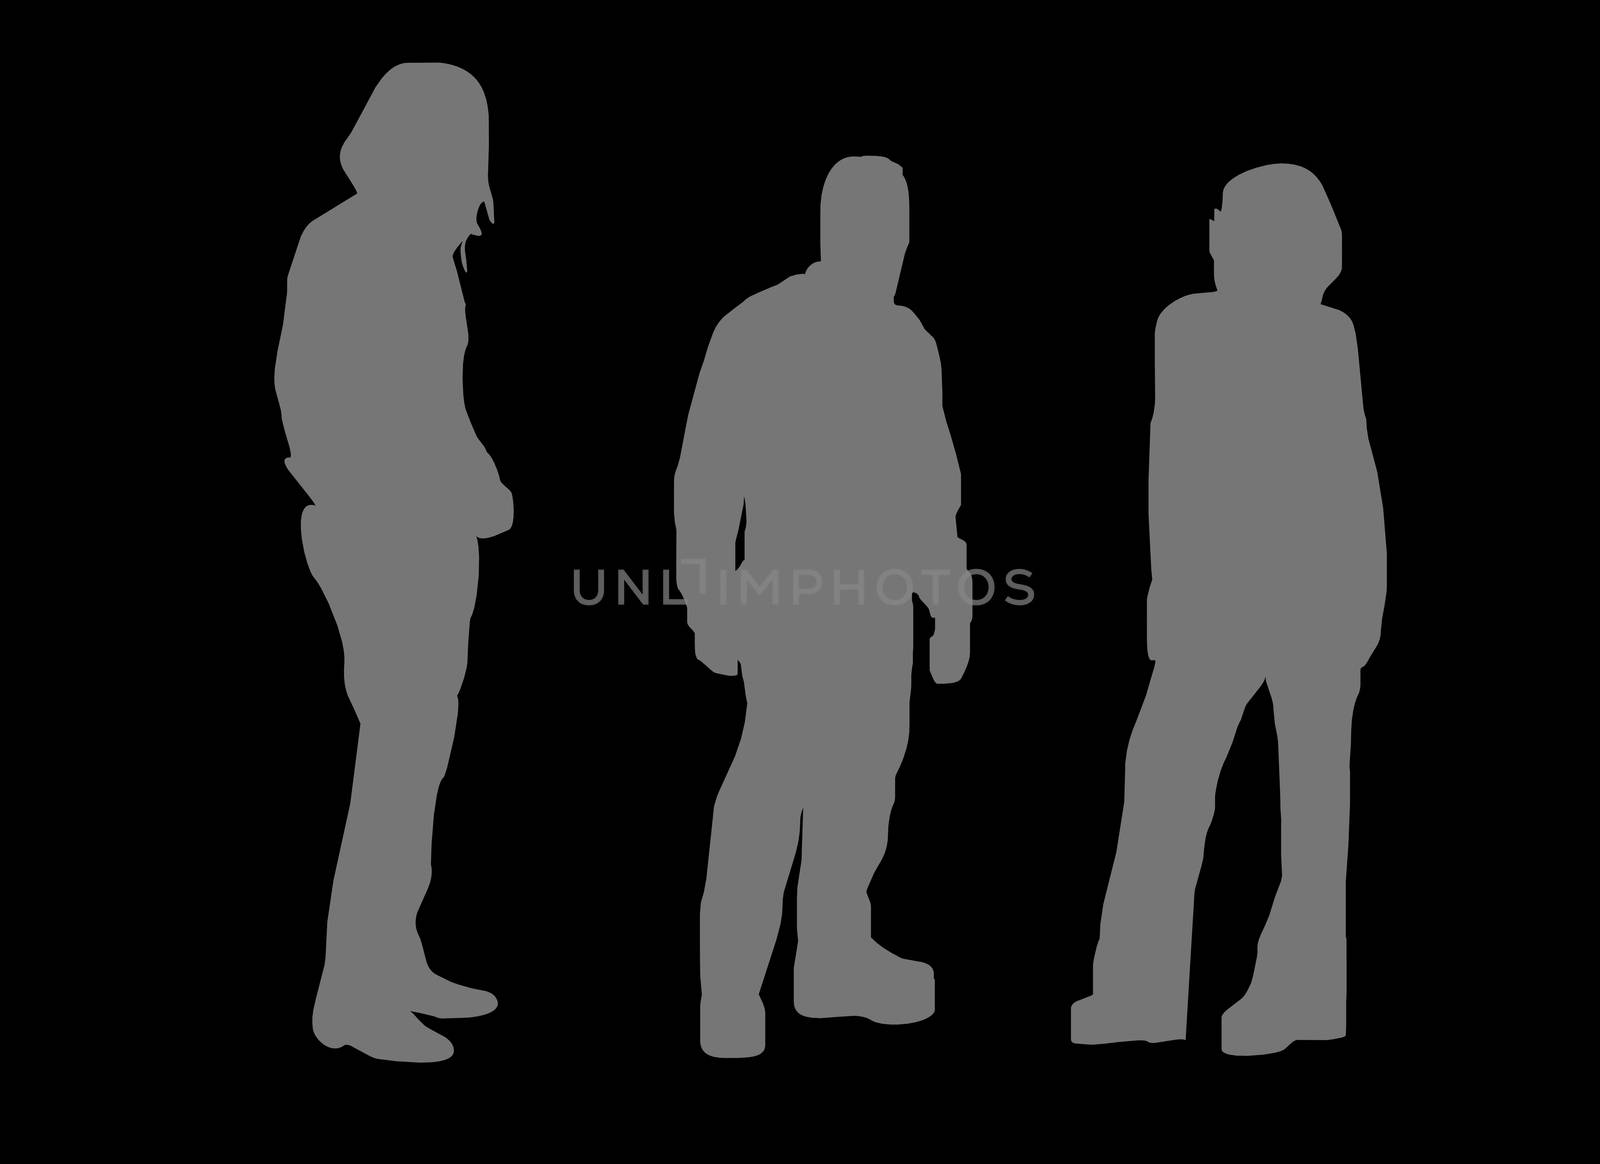 People sillhouette on a black background